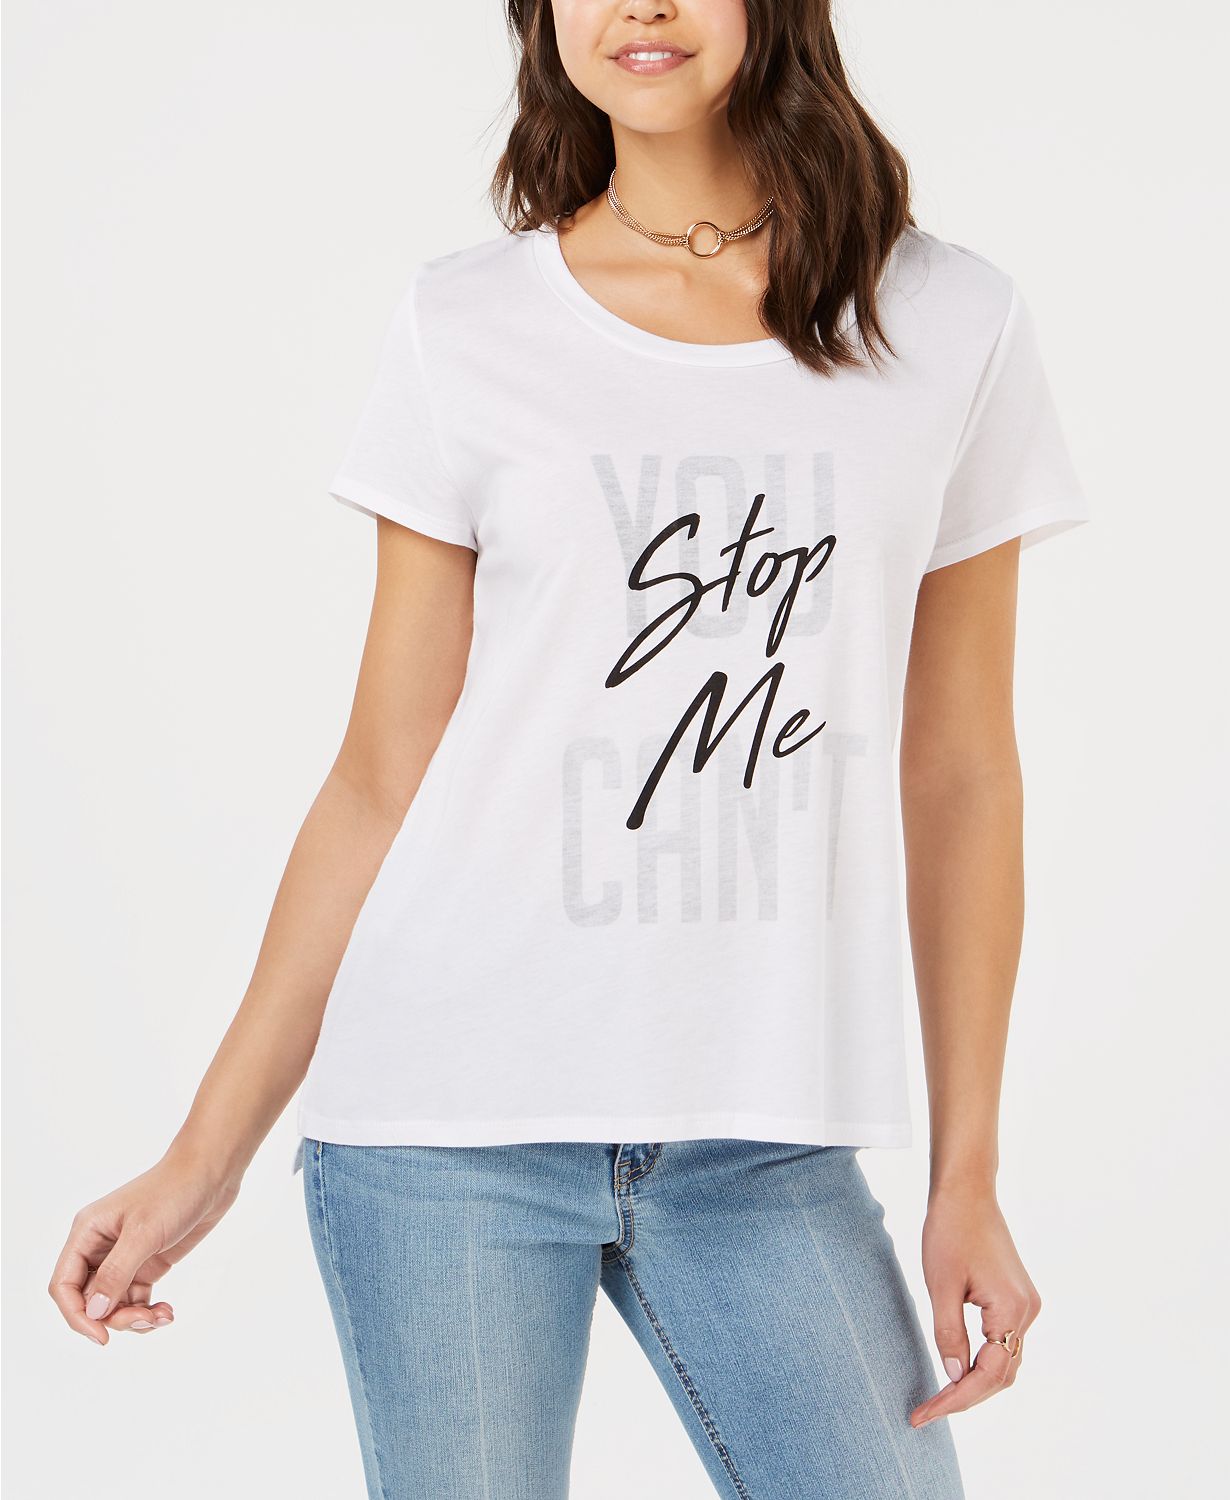 CARBON COPY You Cant Stop Me Short Sleeve Top WHITE XL